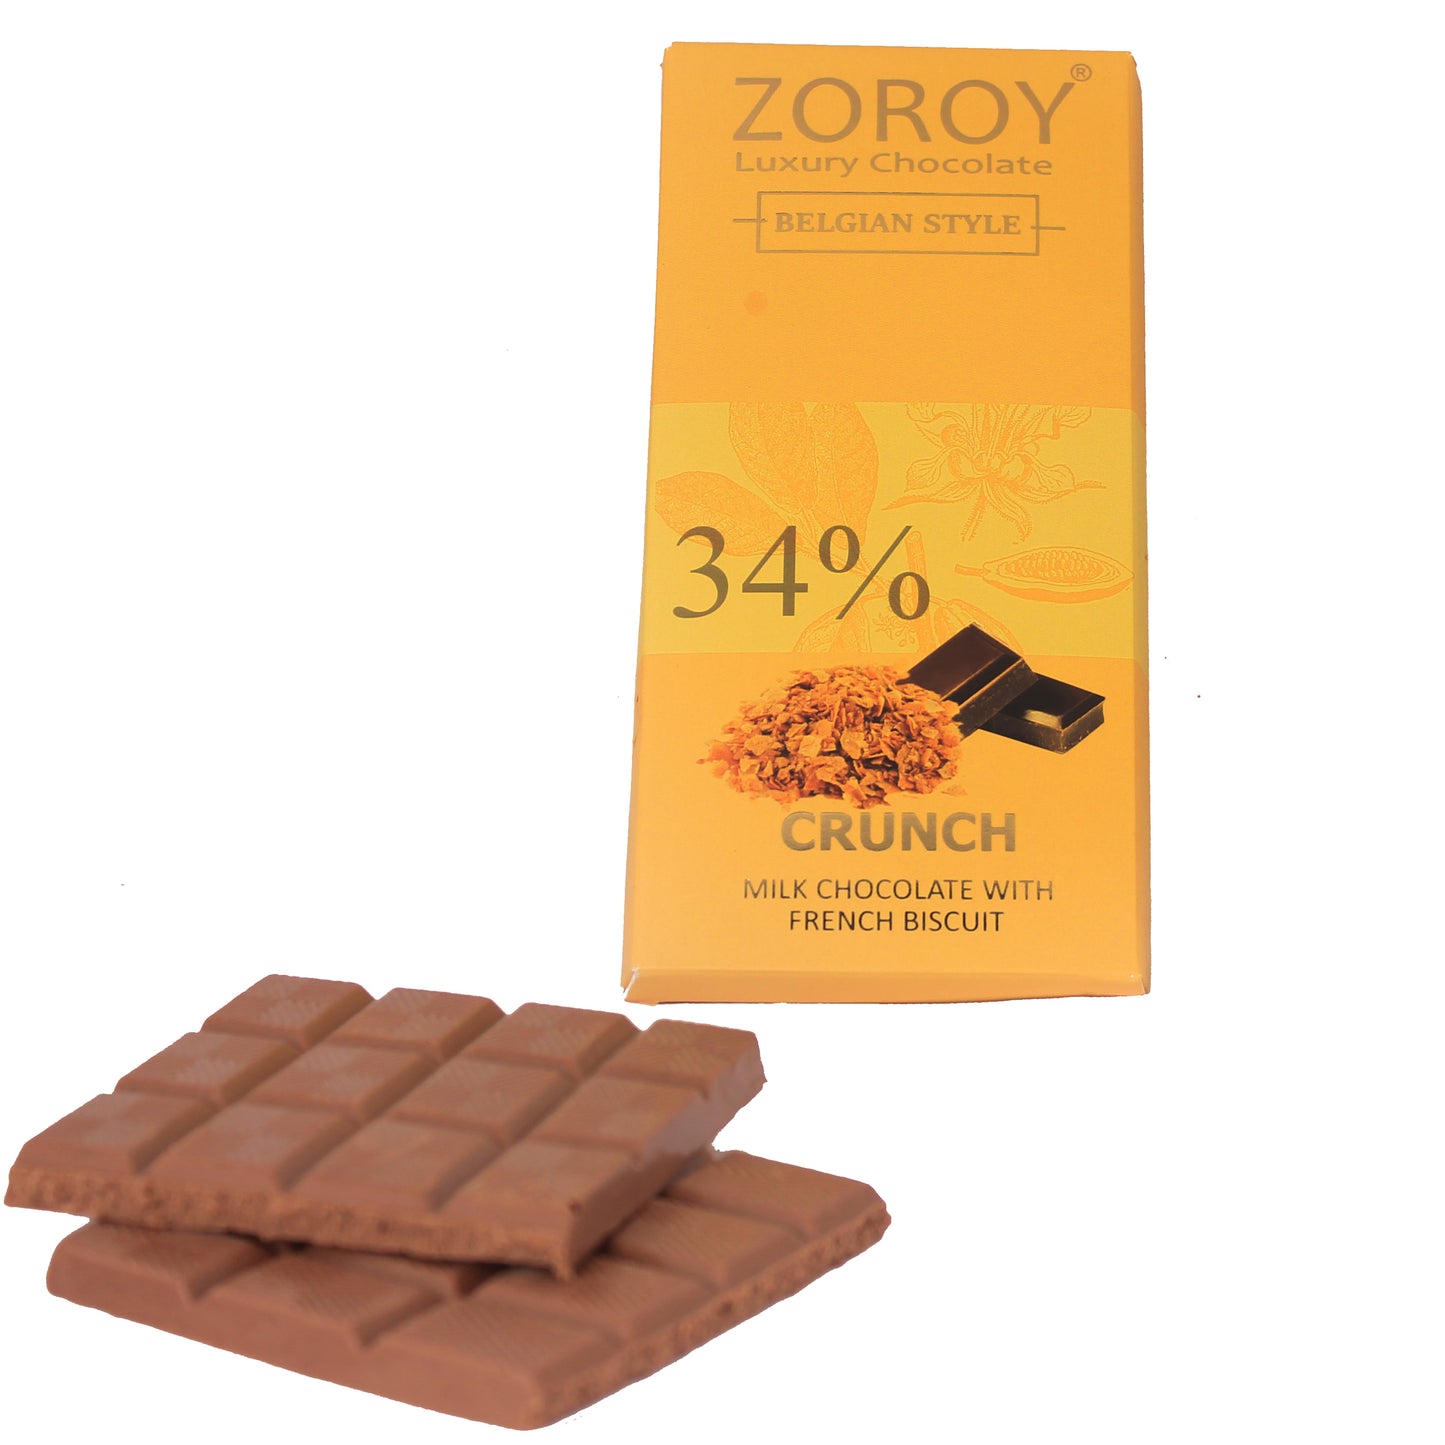 ZOROY LUXURY CHOCOLATE 100% Couverture Milk chocolate bar | French Biscuit Crunch